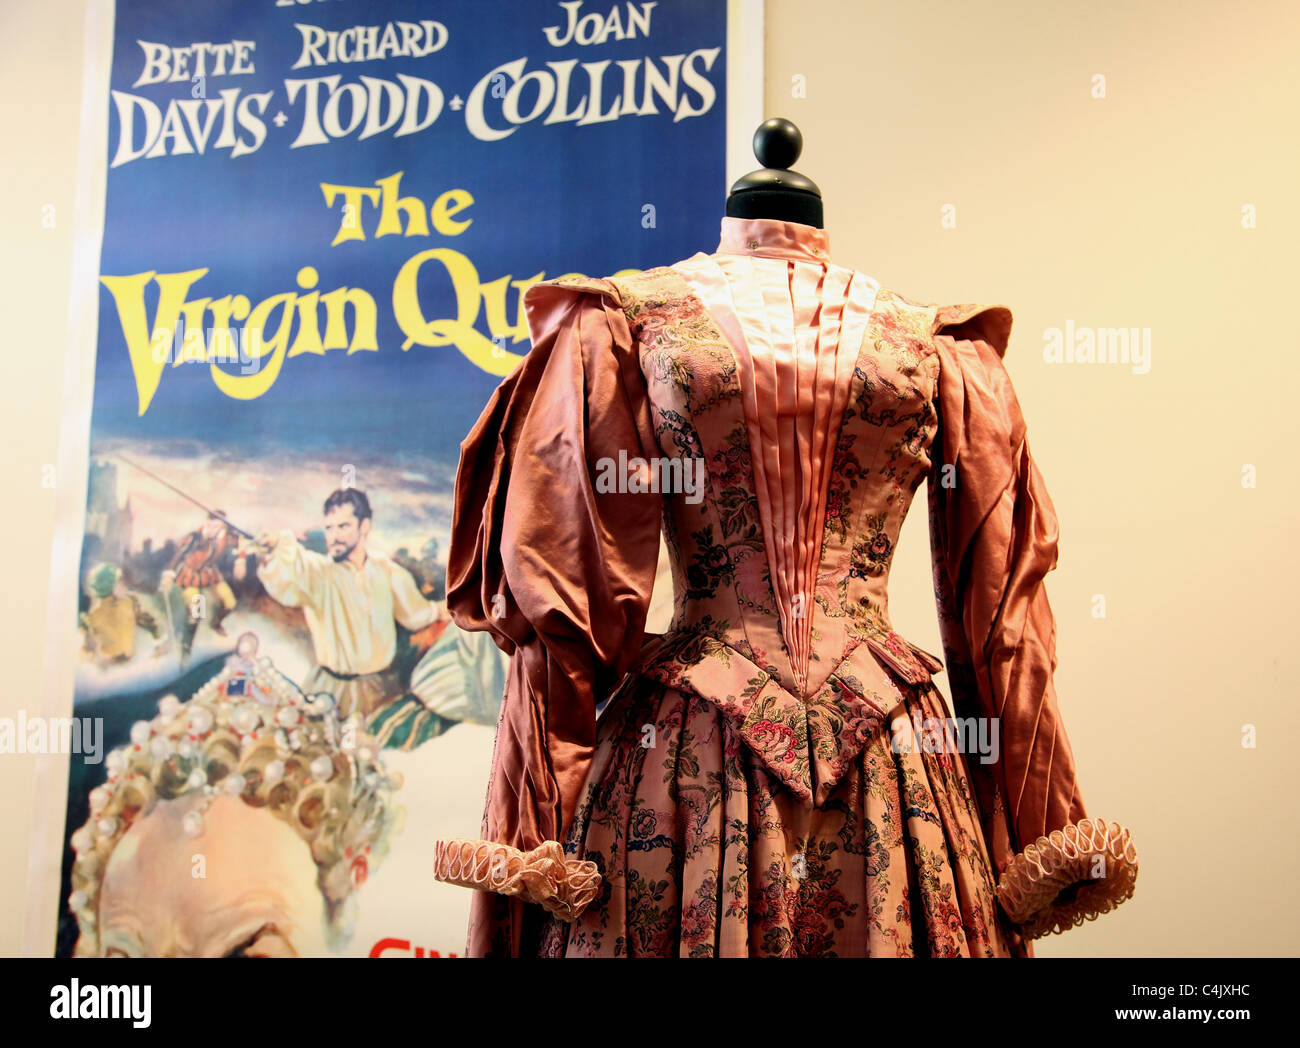 JOAN COLLINS DRESS FROM THE VIRGIN QUEEN DEBBIE REYNOLDS HOLLYWOOD MEMORABILIA AUCTION PREVIEW BEVERLY HILLS LOS ANGELES CALIF Stock Photo